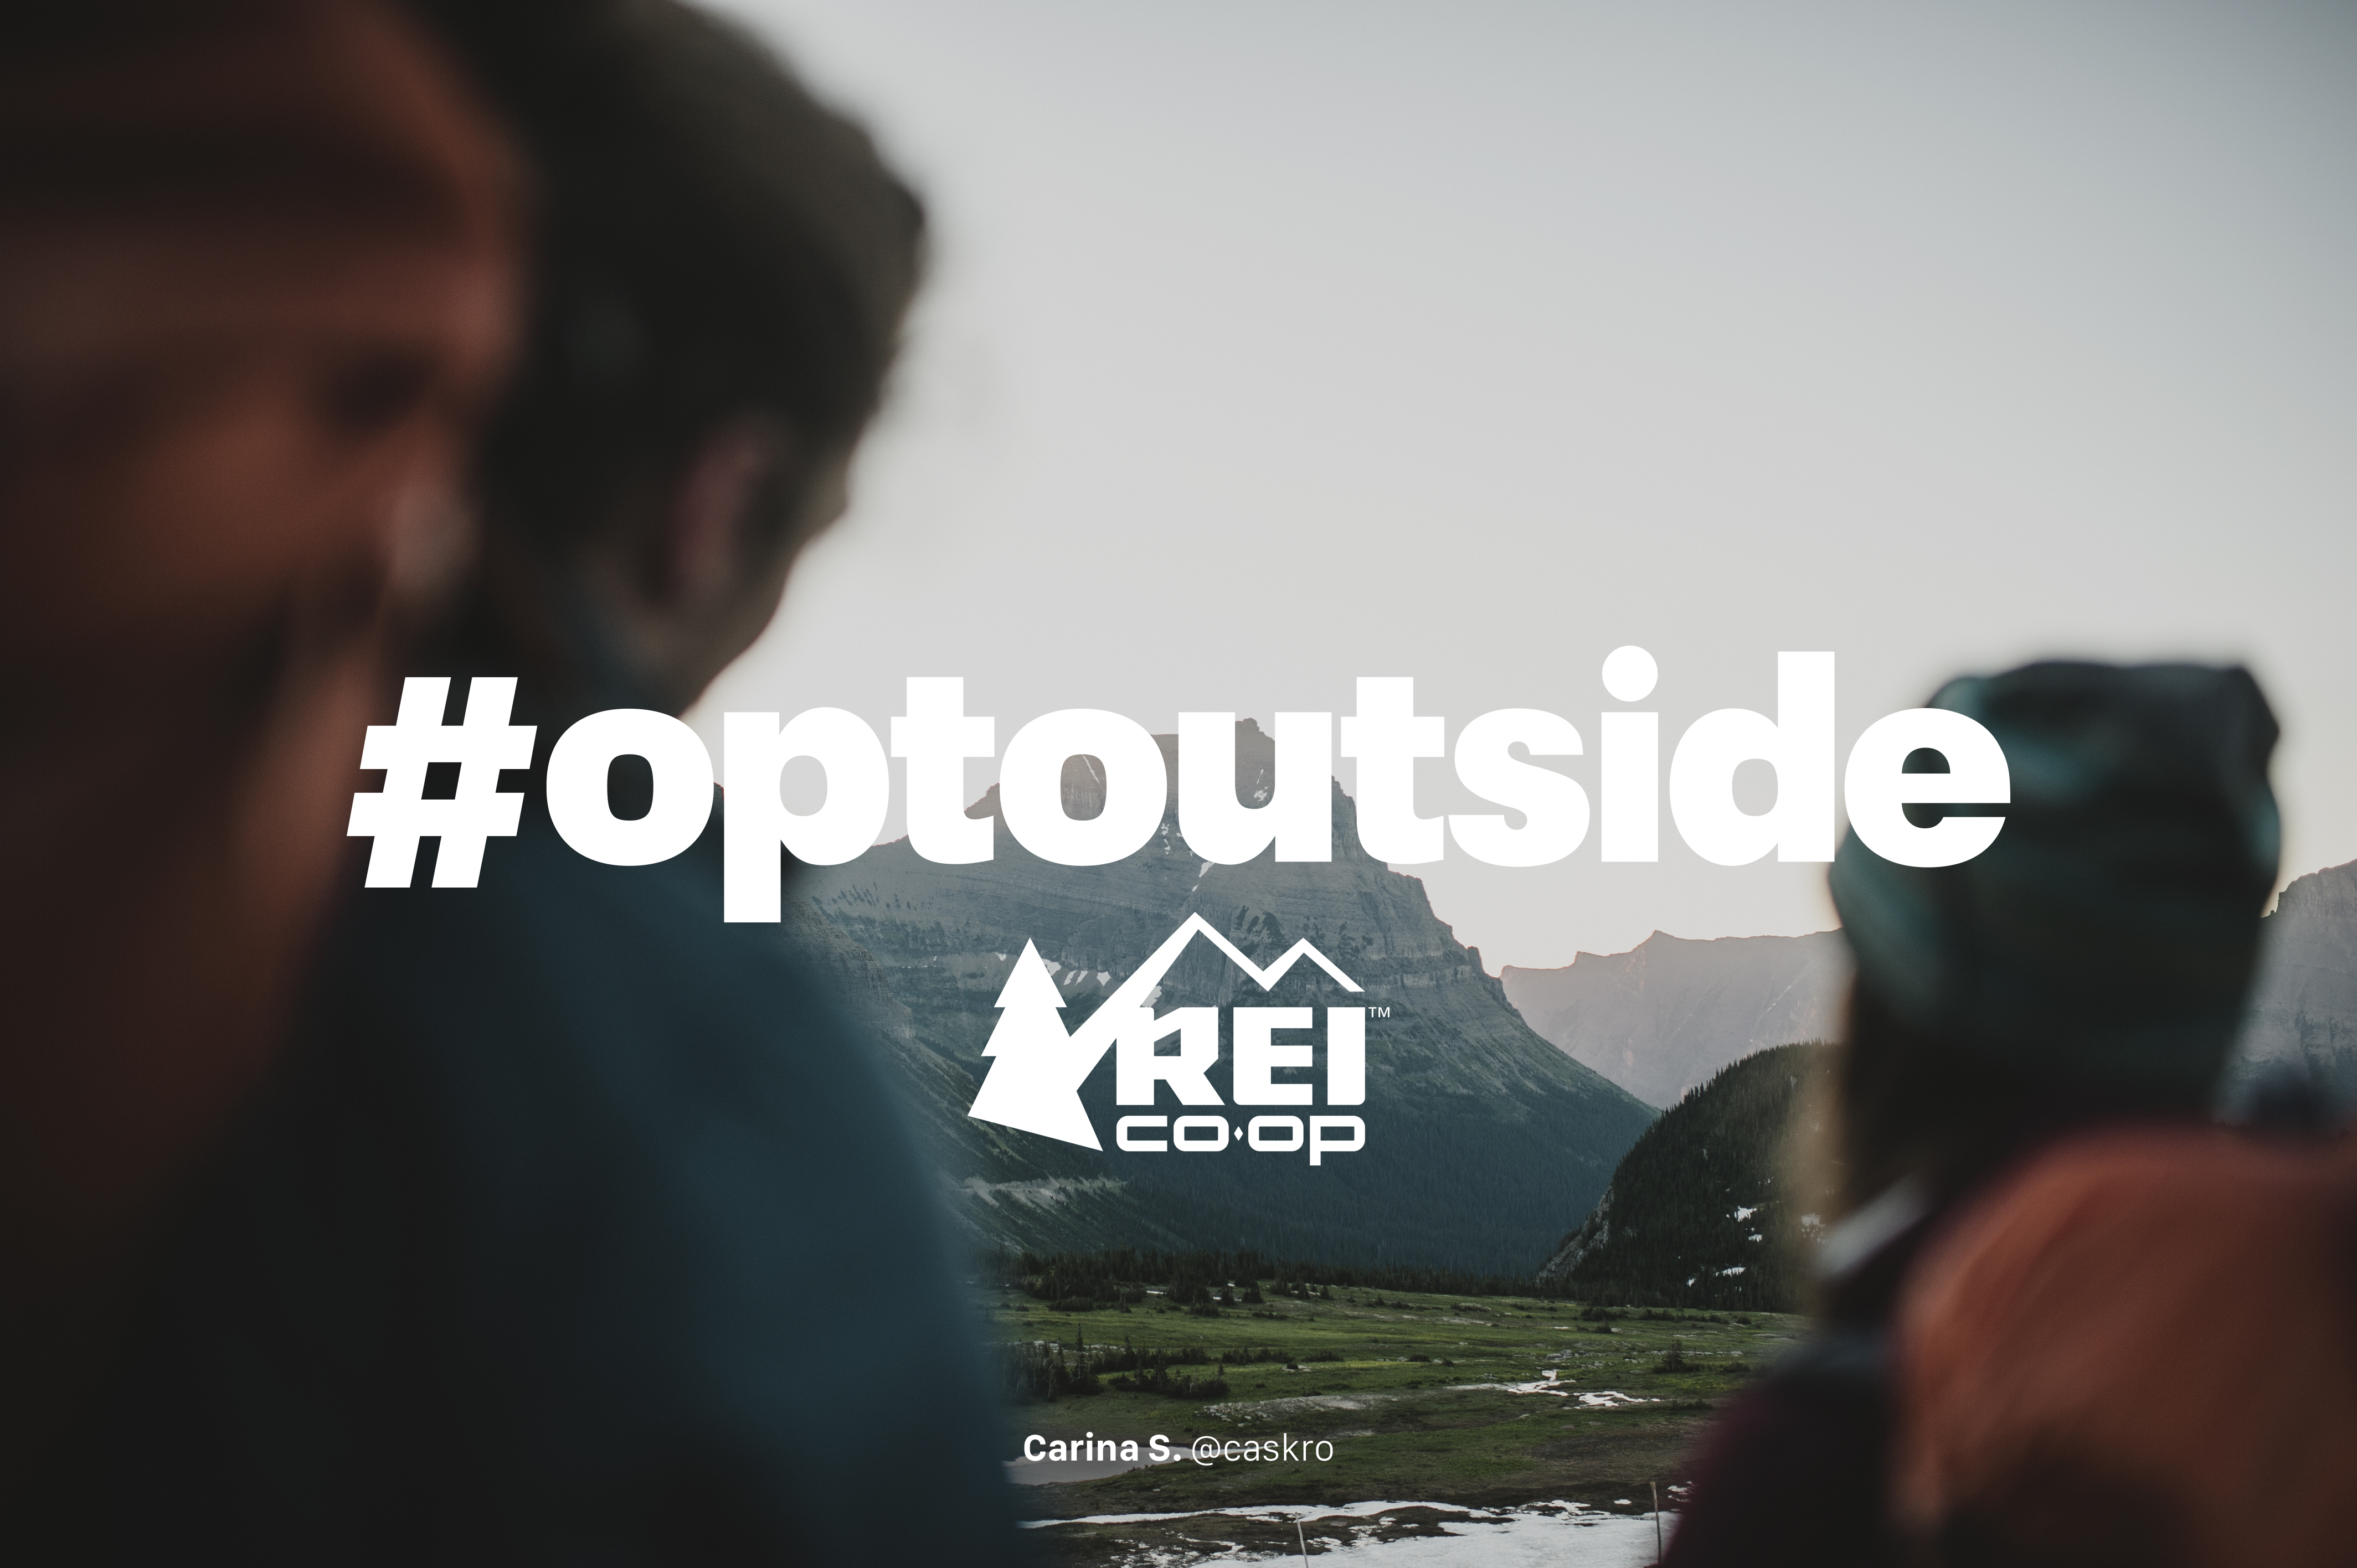 Go All-In on Black Friday by Choosing to #OptOutside